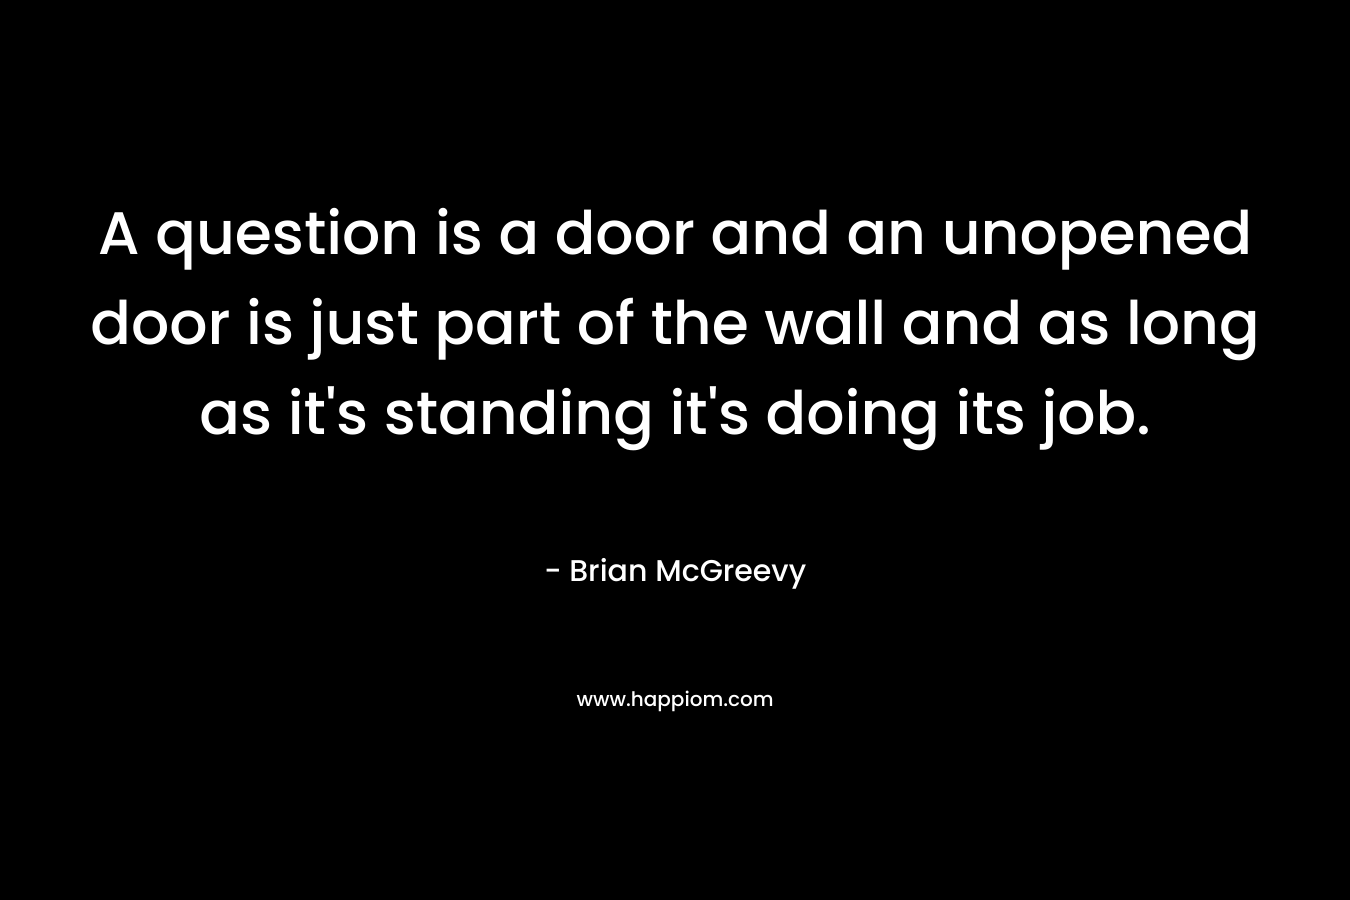 A question is a door and an unopened door is just part of the wall and as long as it's standing it's doing its job.